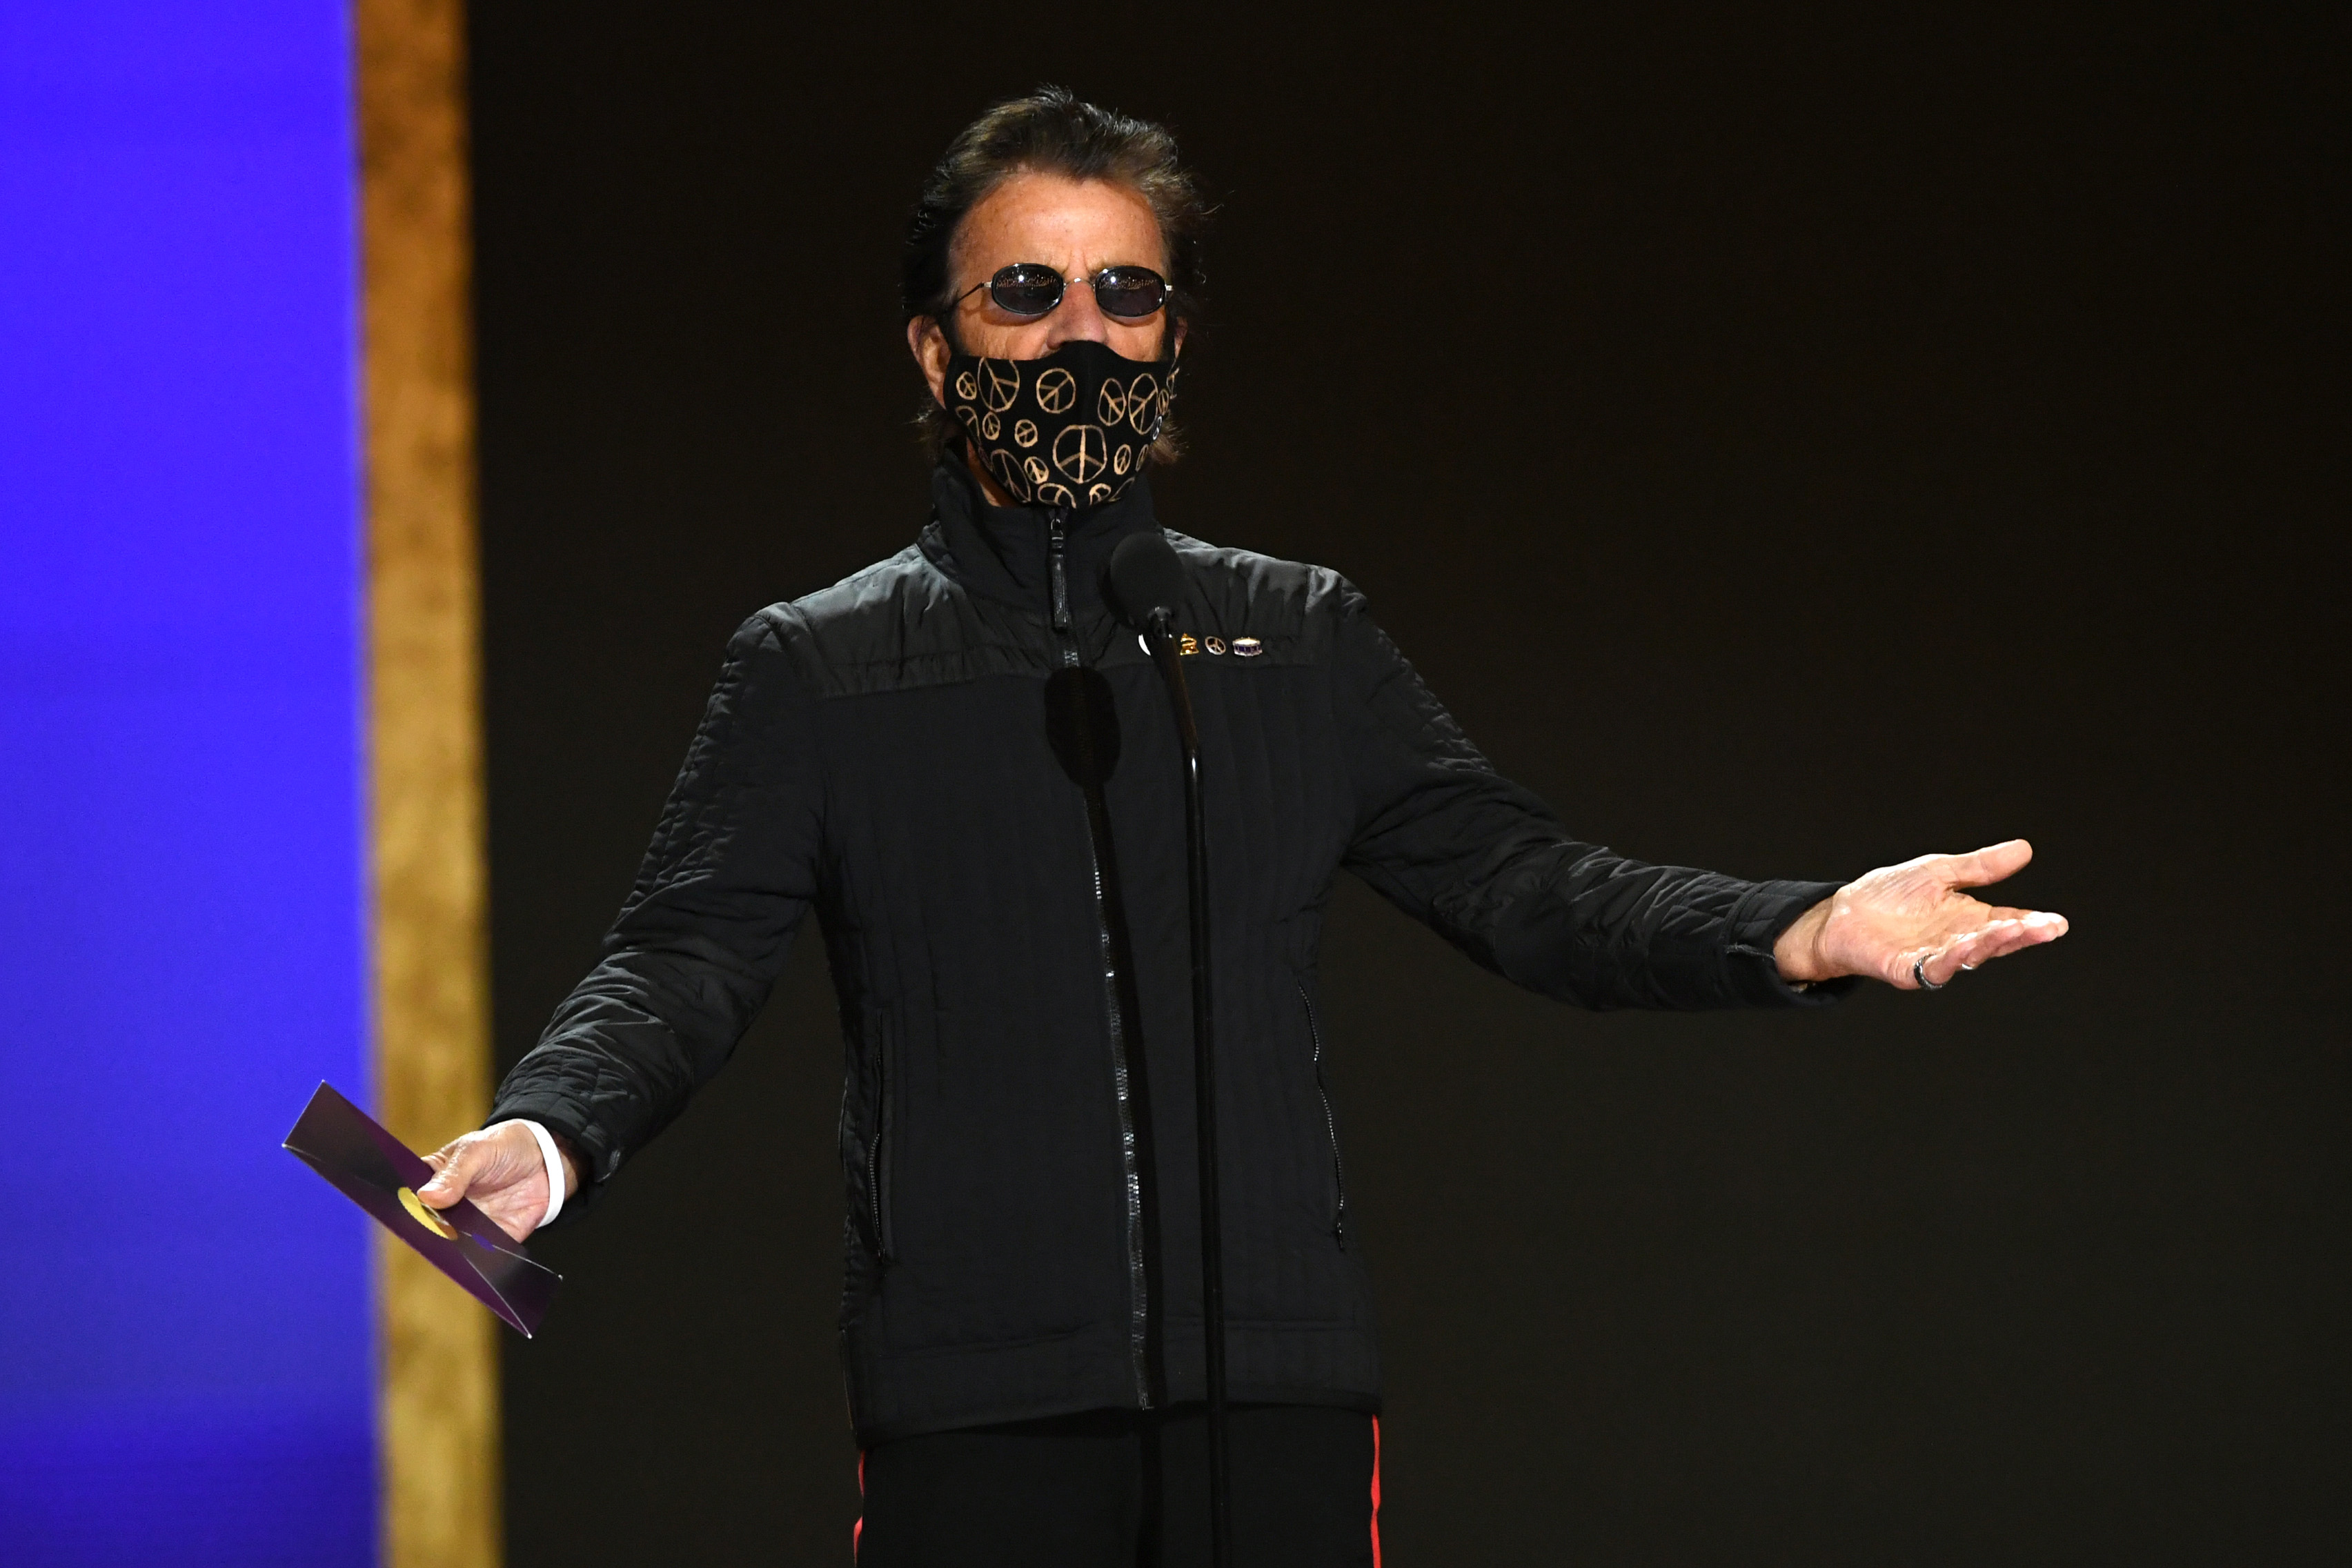 Ringo Starr at the 2021 Grammy Awards, wearing a black surgical mask